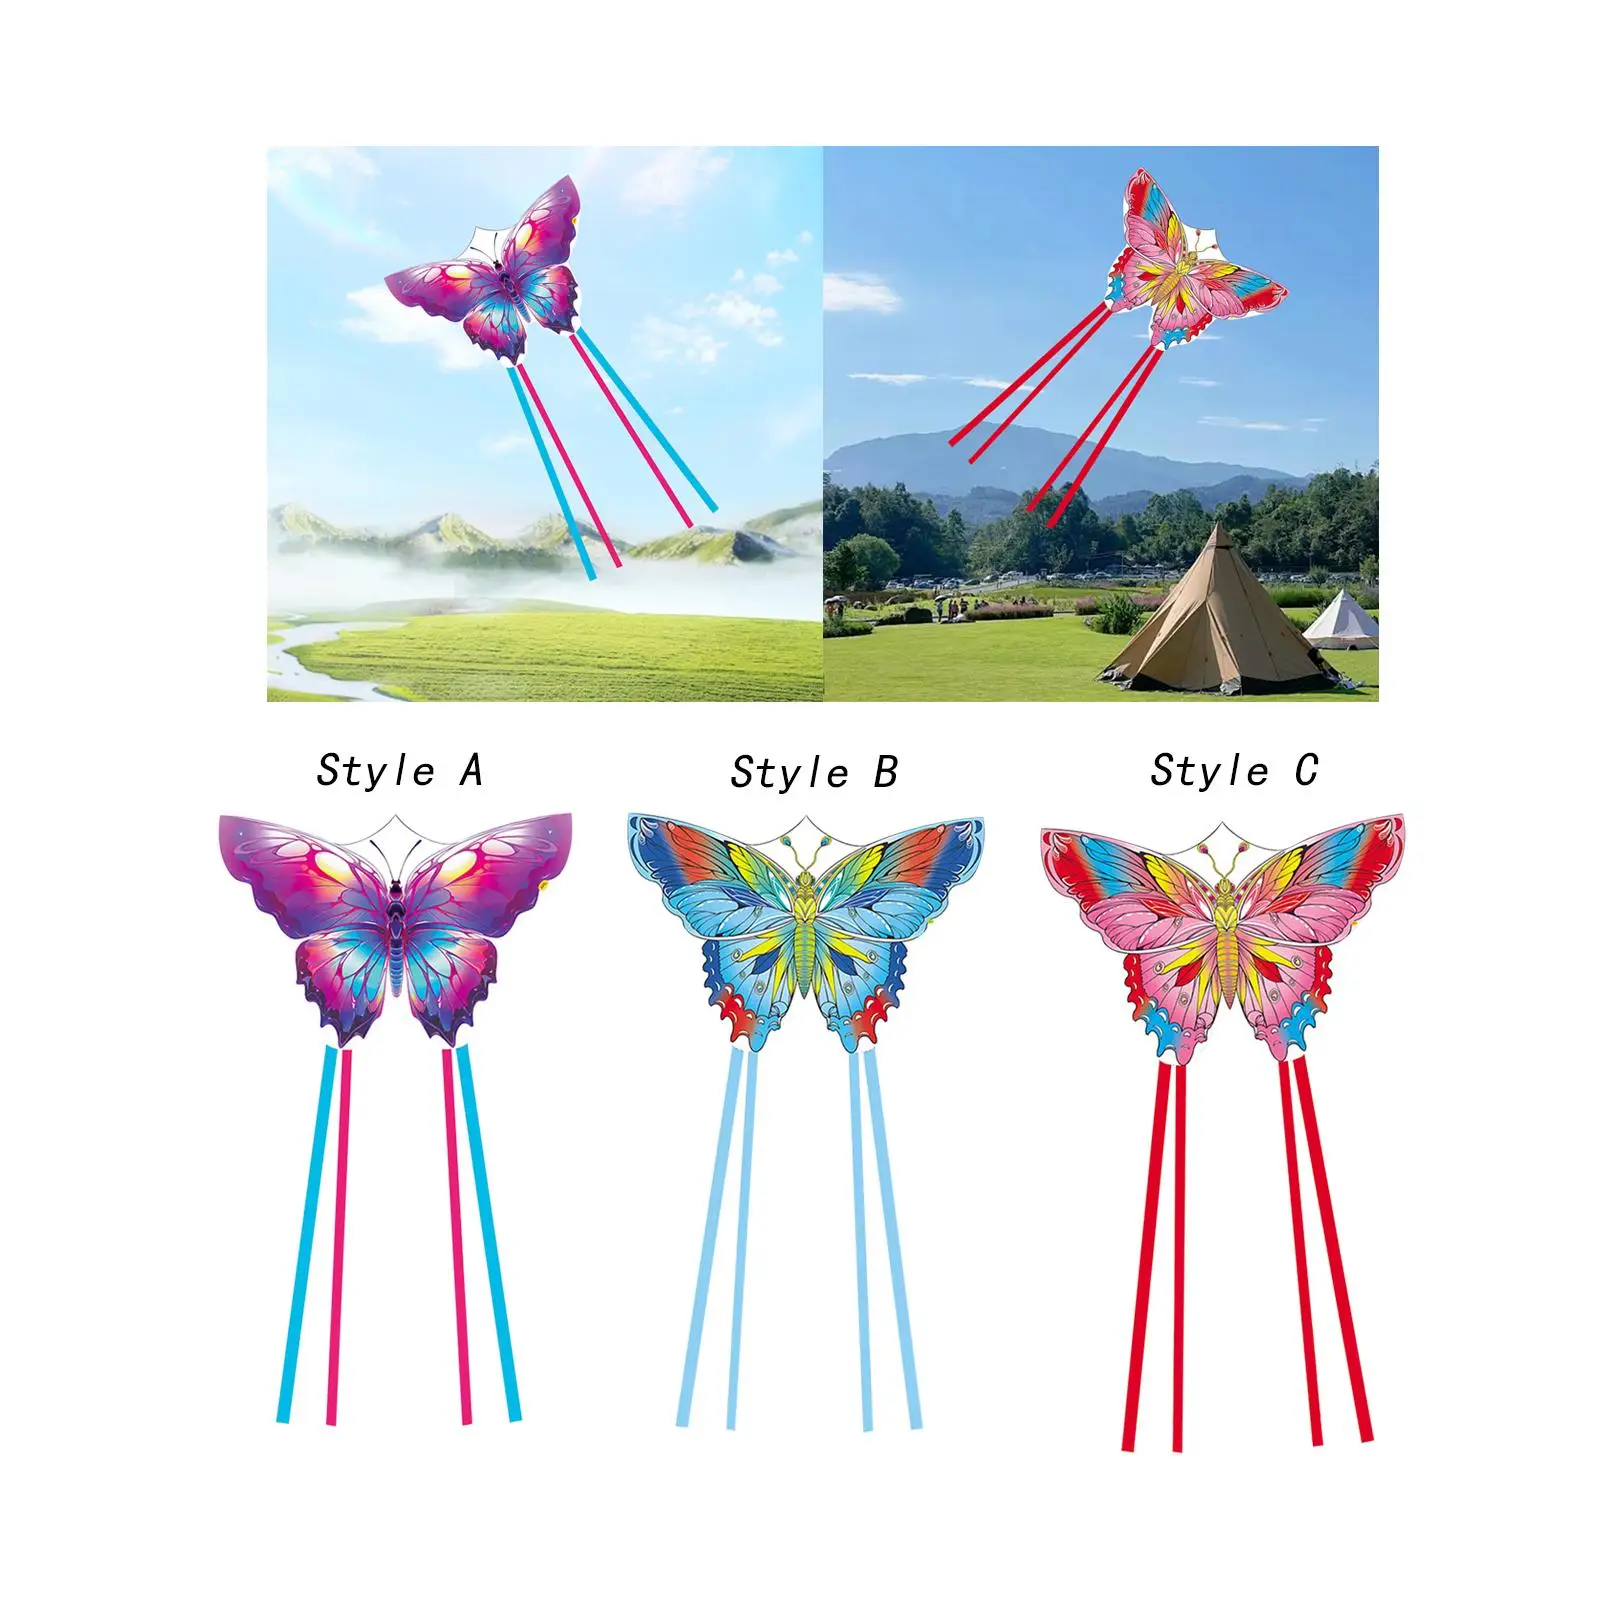 Huge Kite for Adults Kids Easy Flying Eye Catching Single Line Sports Kite Fabric Kites for Farm Outdoor Yard Birthday Gift Lawn